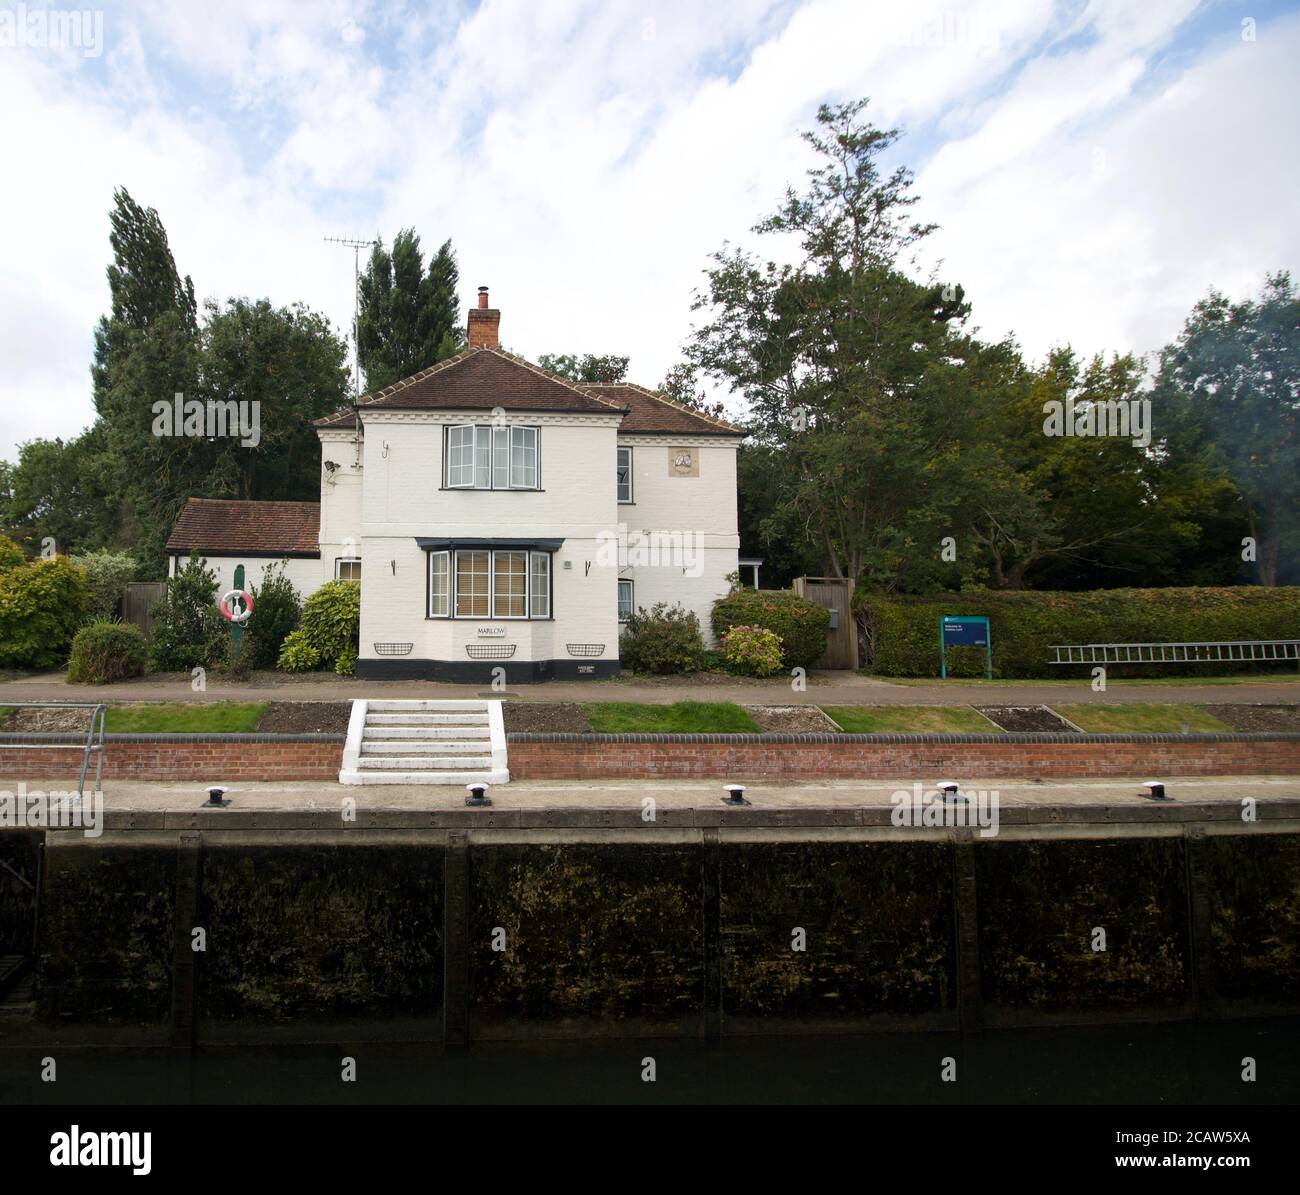 25 July 2020 - Marlow, UK: Canalside cottage with steps and gardens Stock Photo